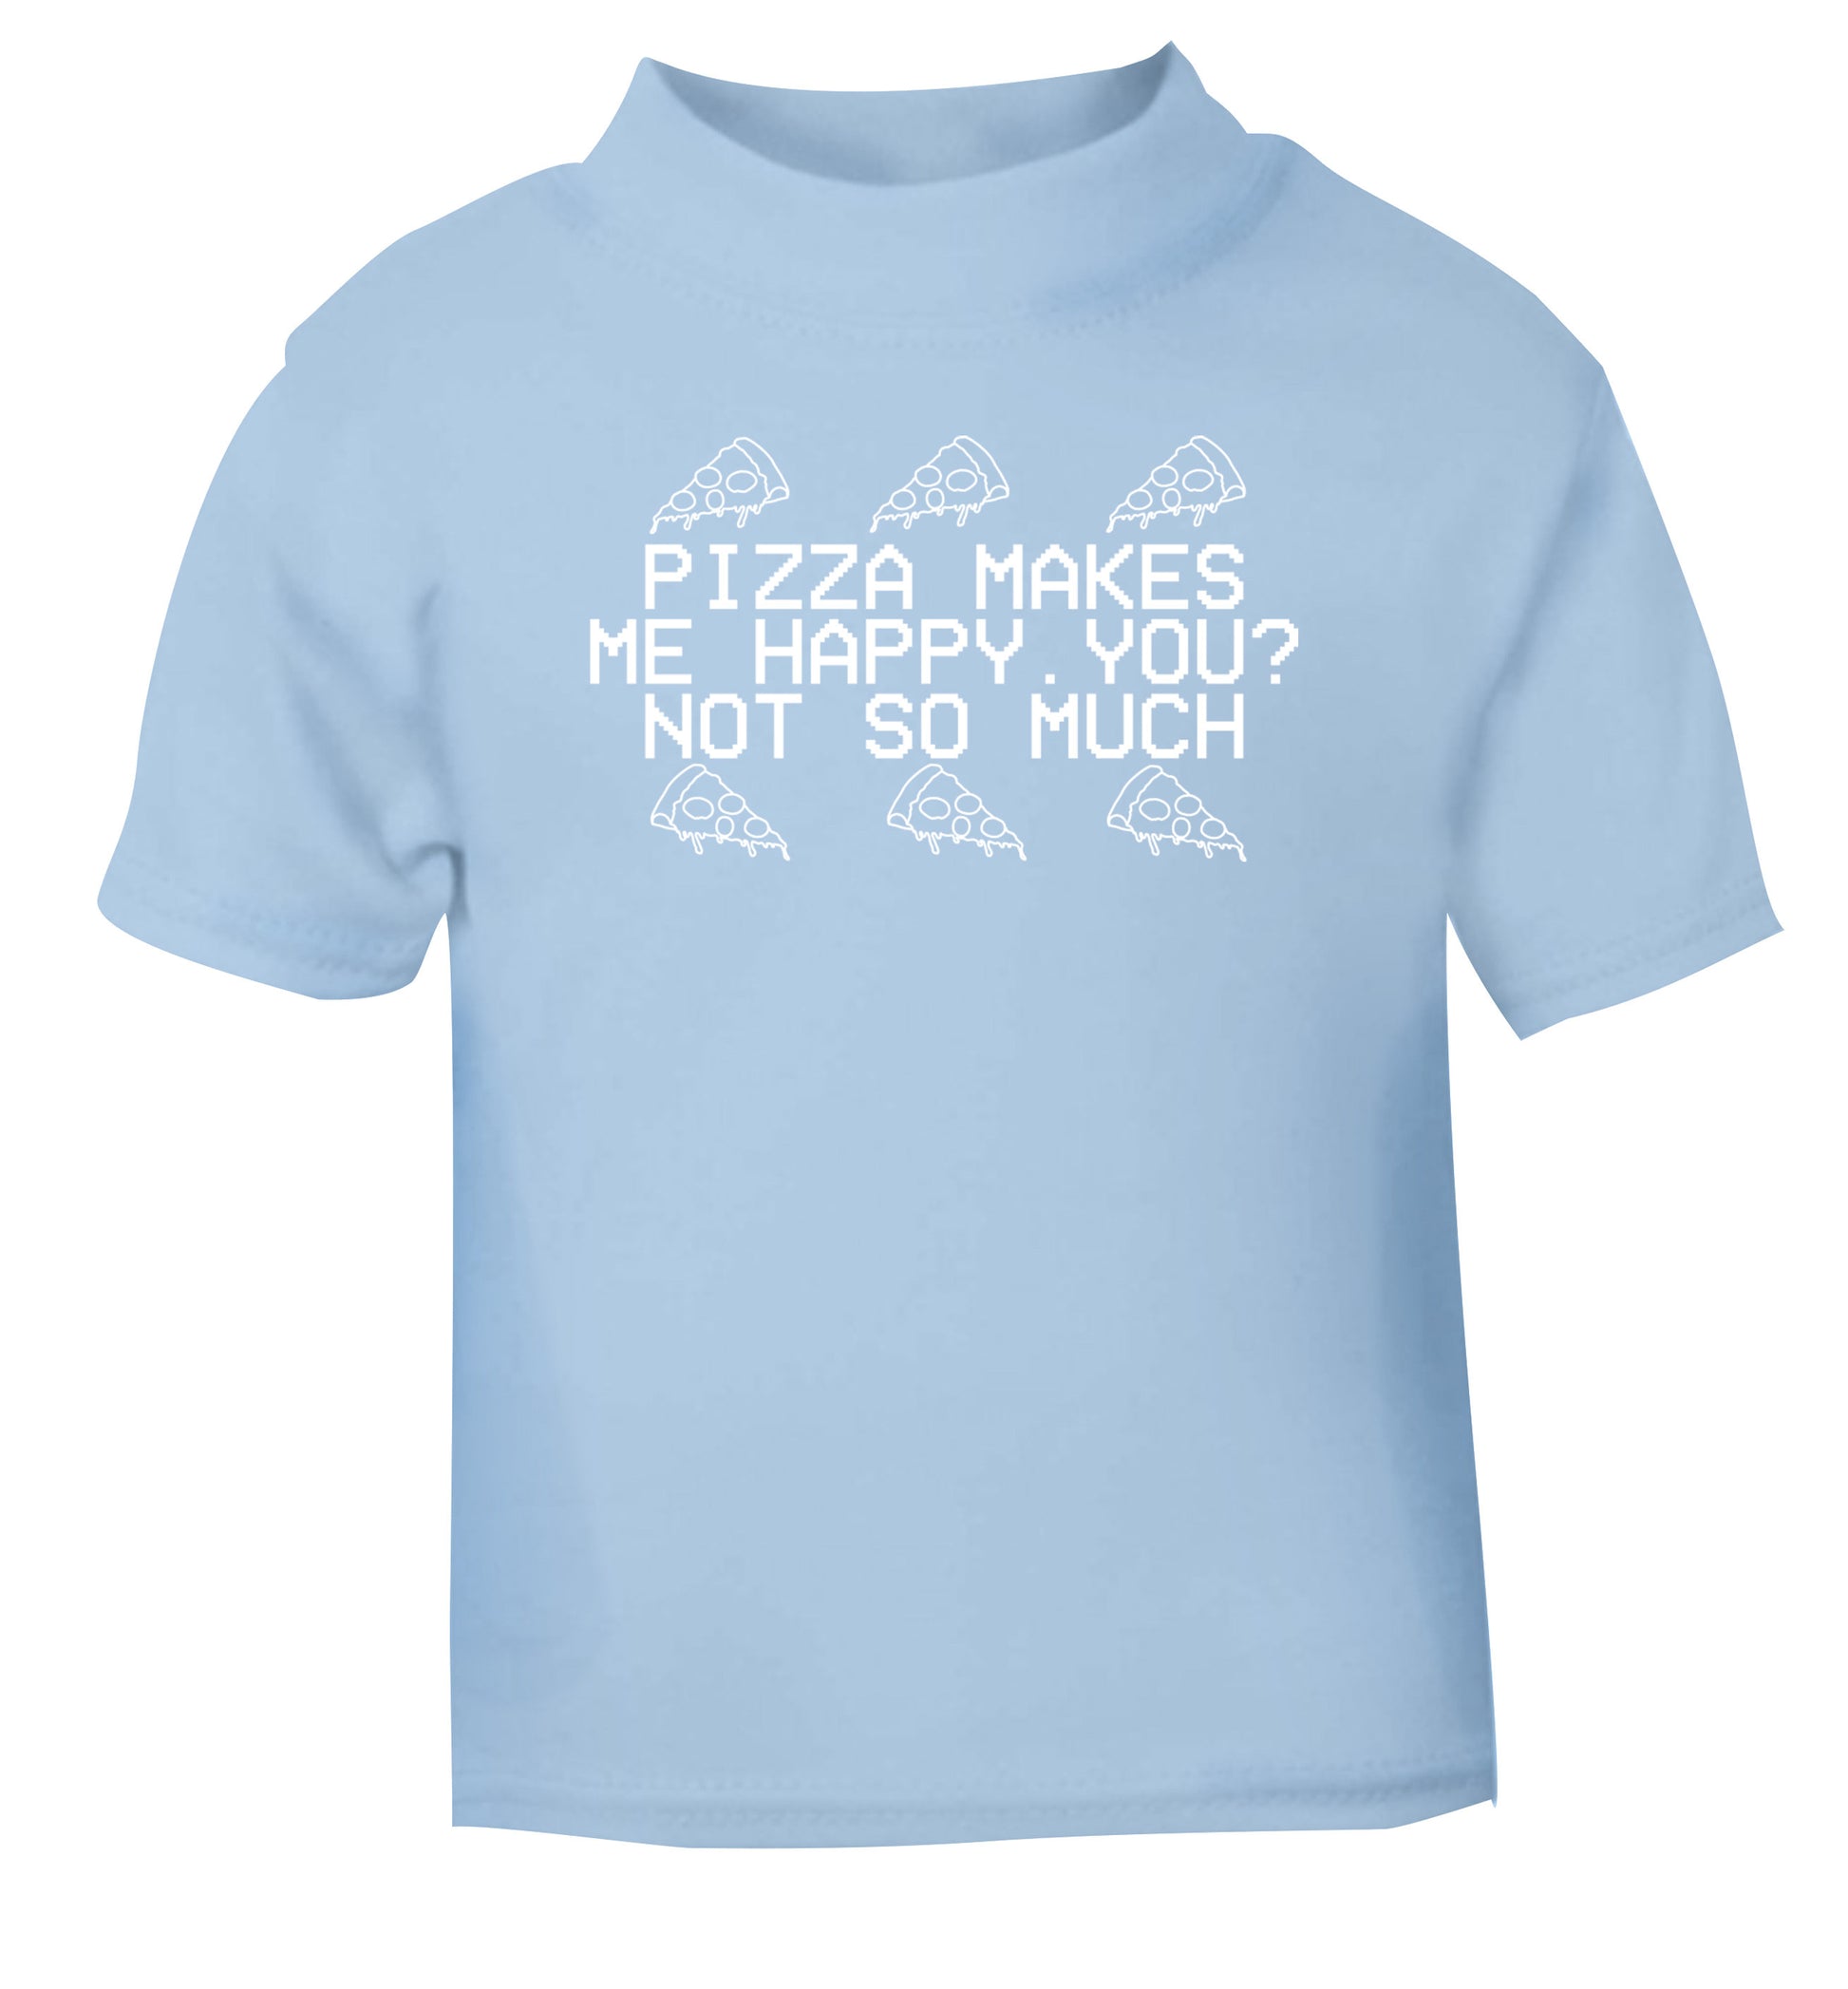 Pizza makes me happy, You? Not so much light blue Baby Toddler Tshirt 2 Years